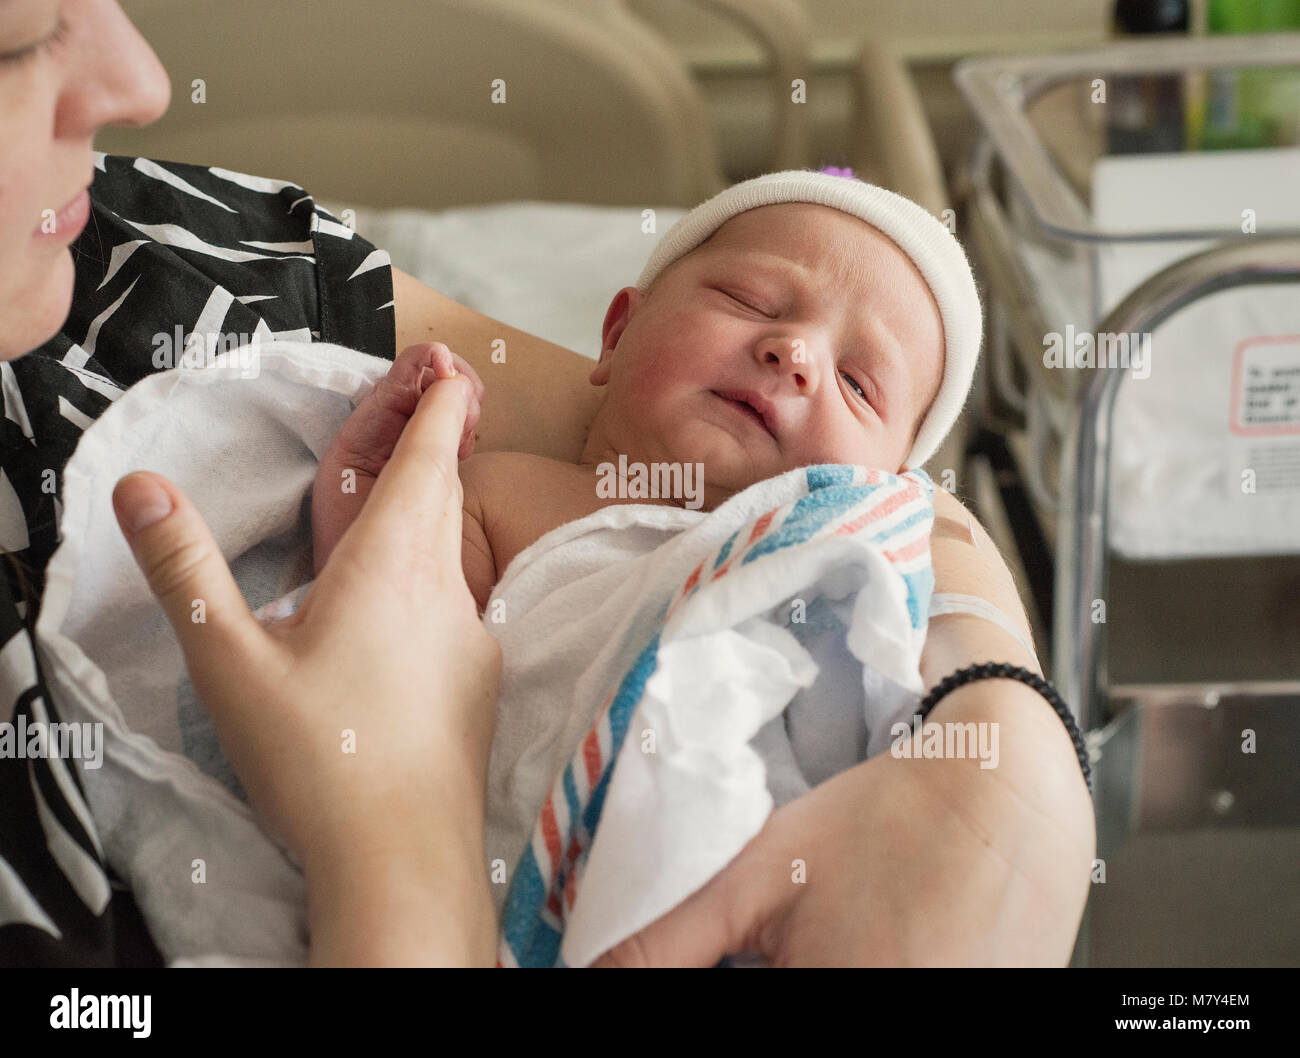 A newborn baby being held in the hospital by it's mother the day it's born. Stock Photo